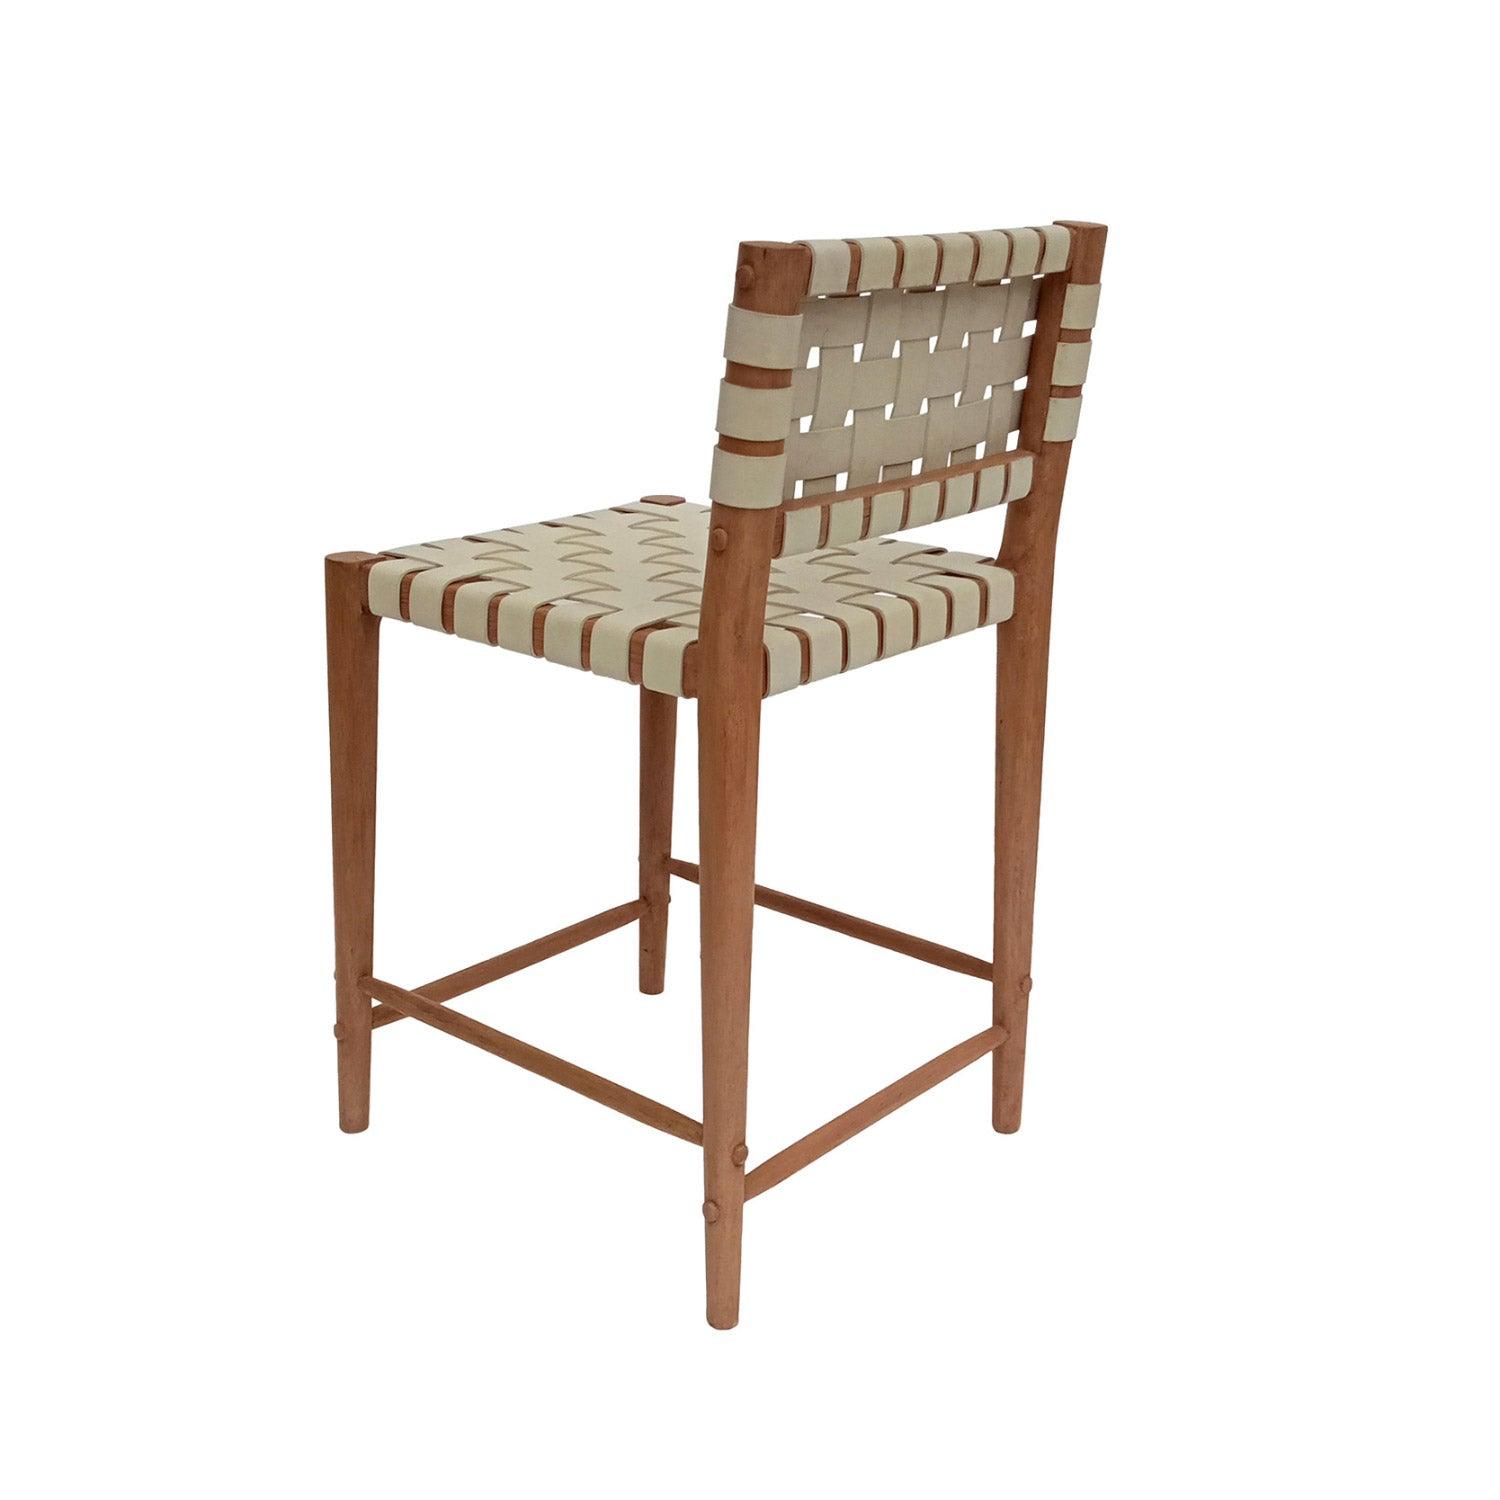 Criss Cross Leather Strip Counter Stool - Belle Escape